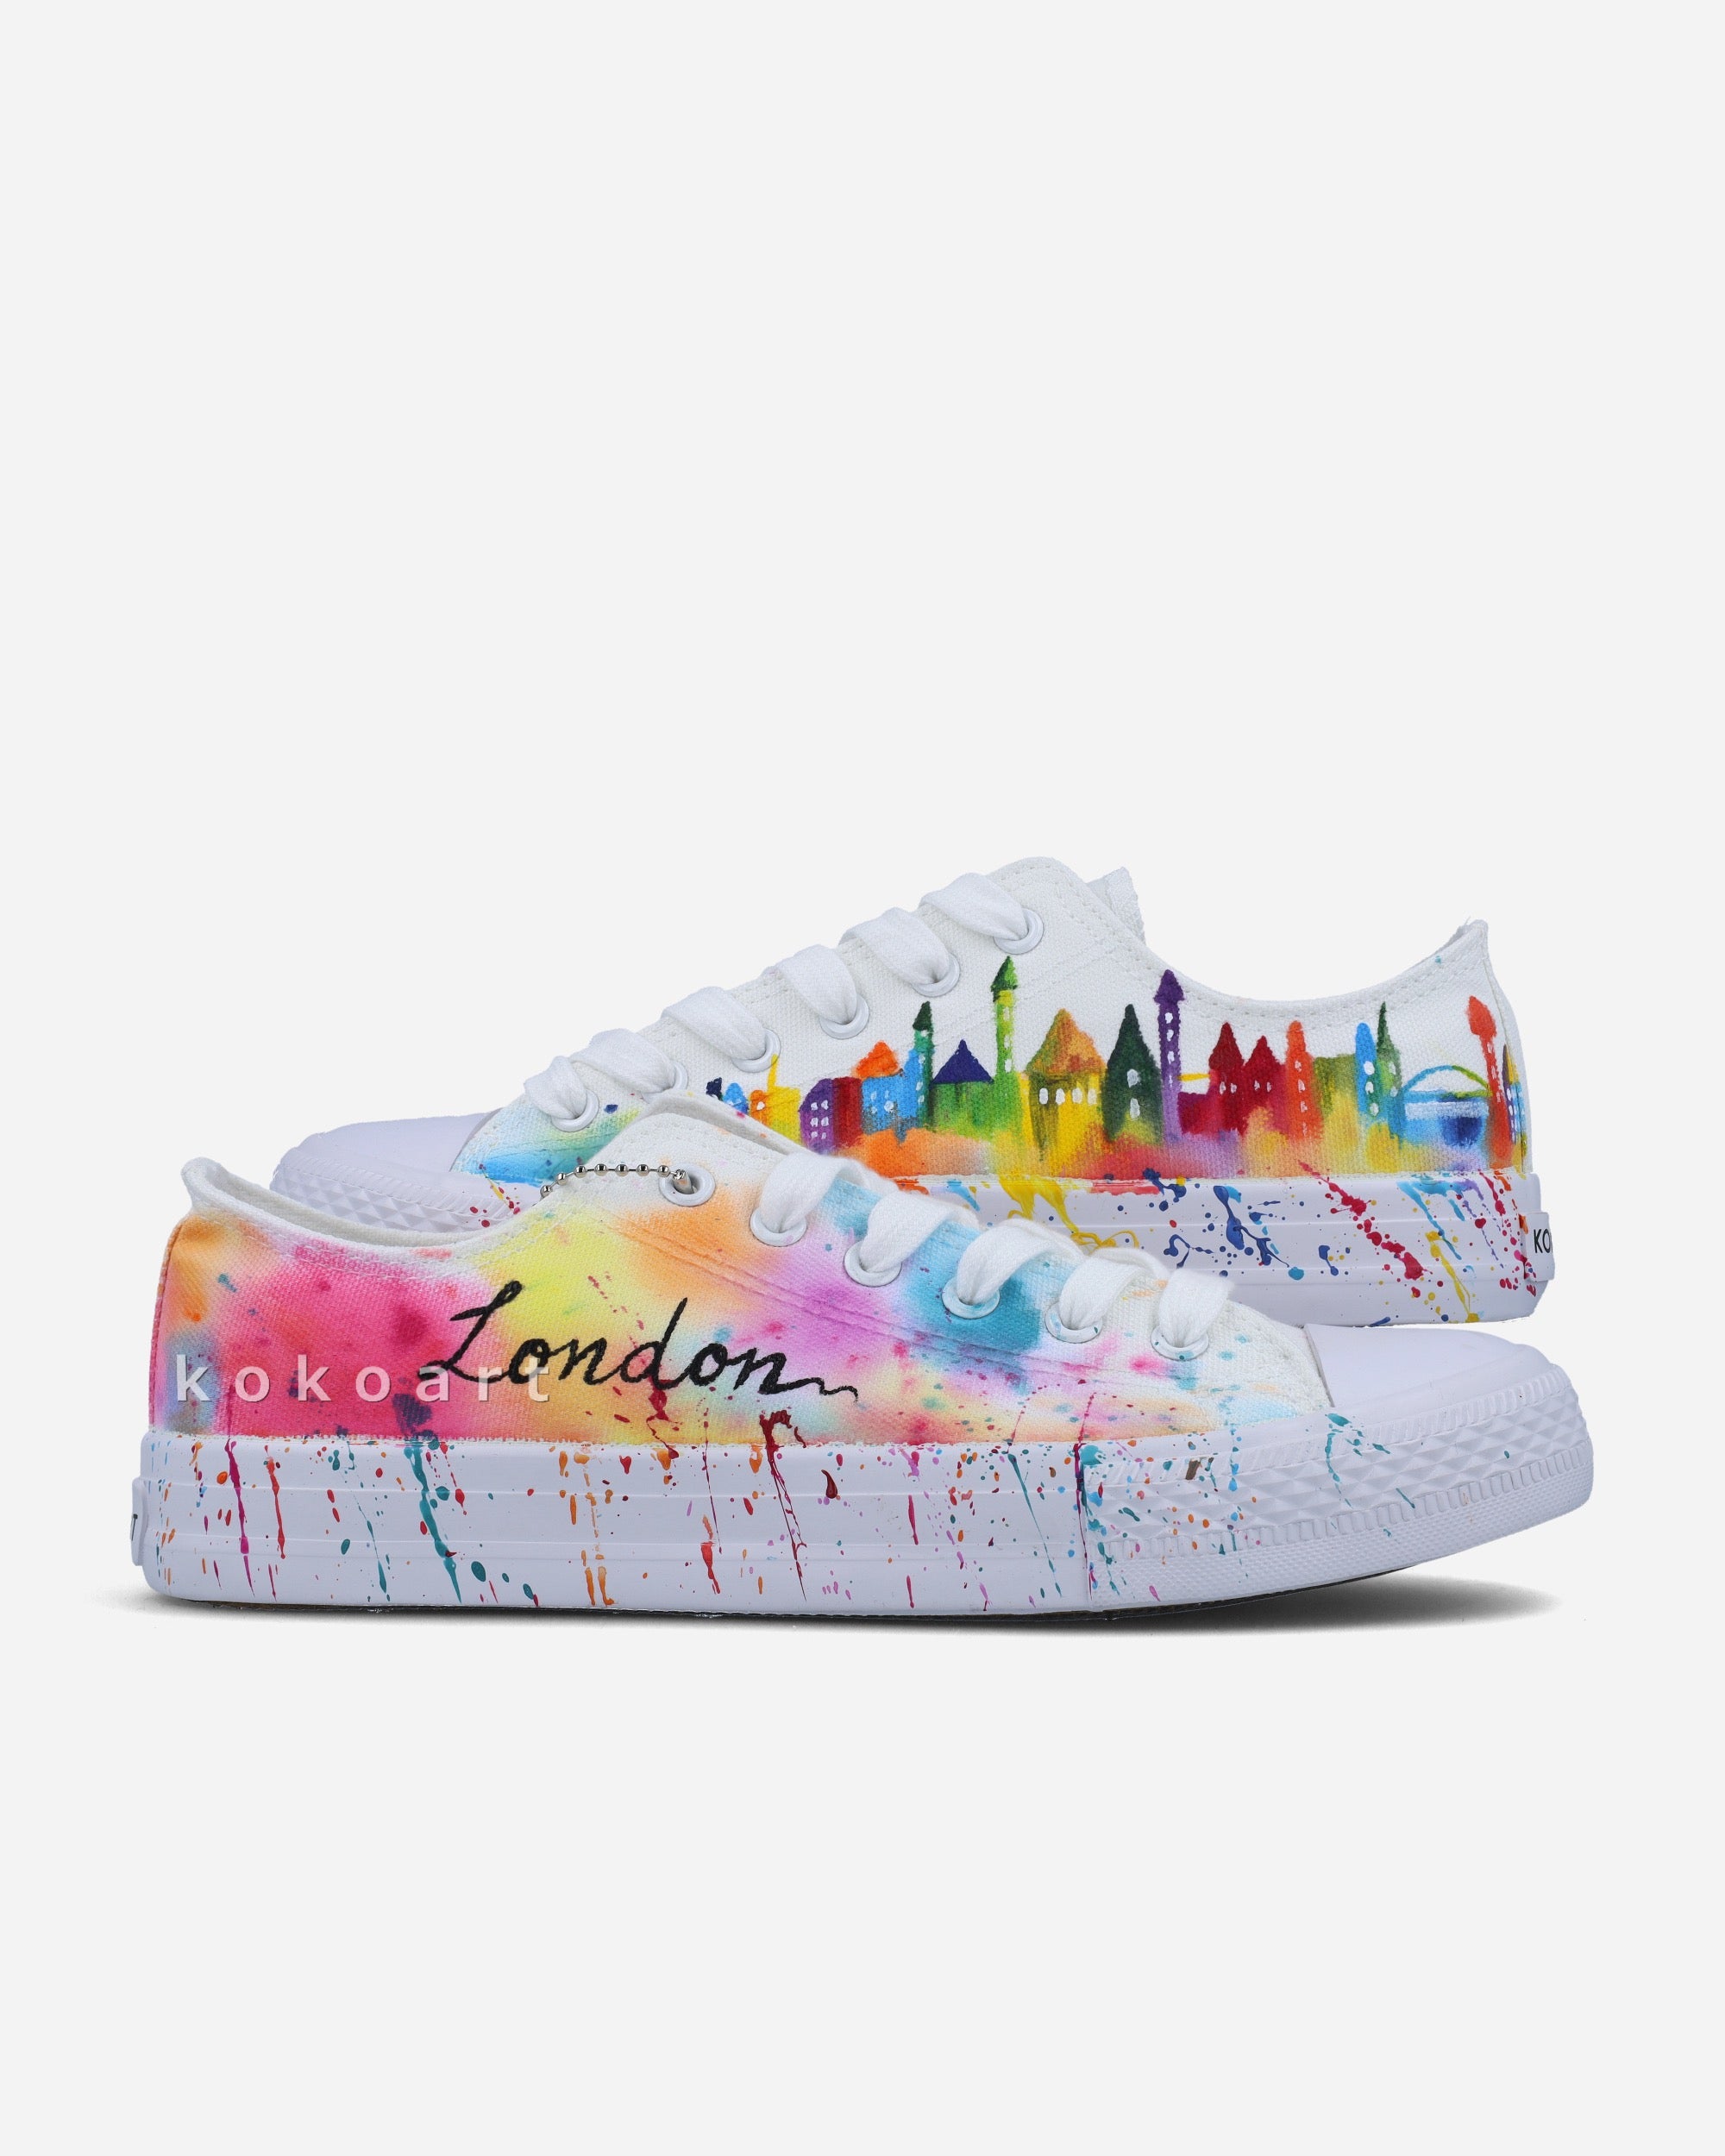 London Skyline Watercolour and Splatters Hand Painted Shoes